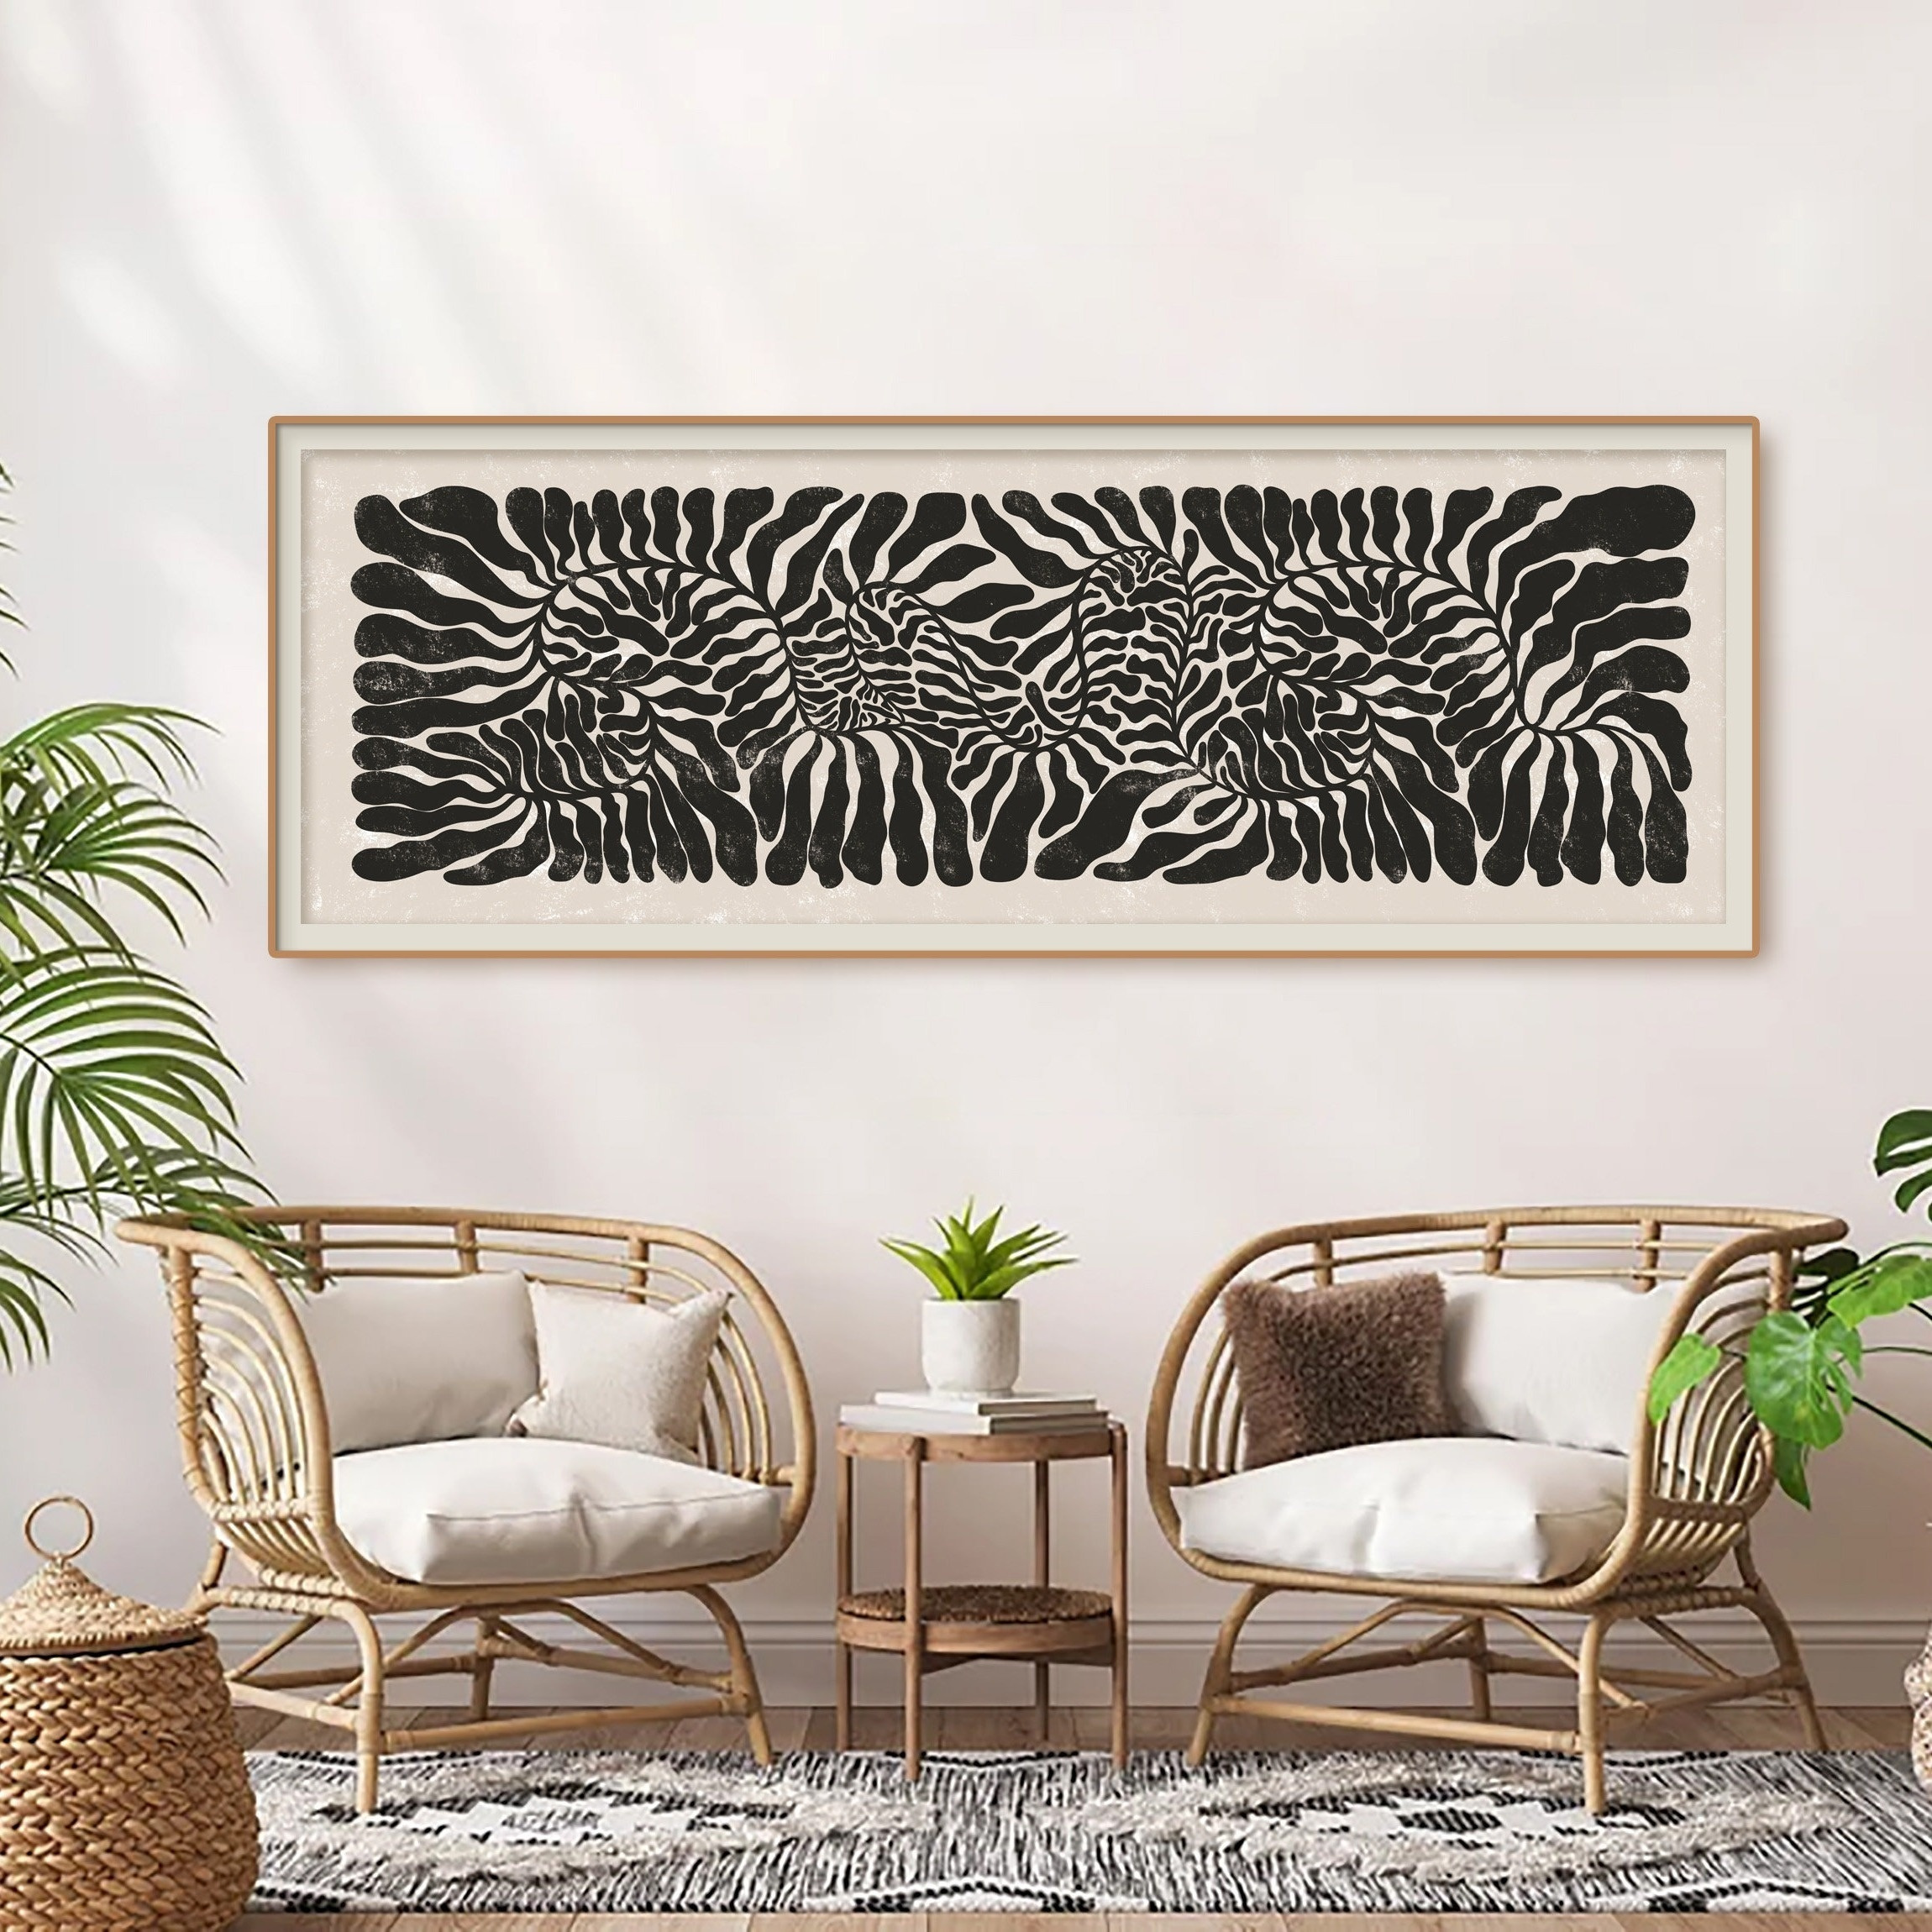 

1pc Abstract Black & White Striped Canvas Art - Frameless Wall Decor For Living Room, Bedroom, Home Office, And Dining Area